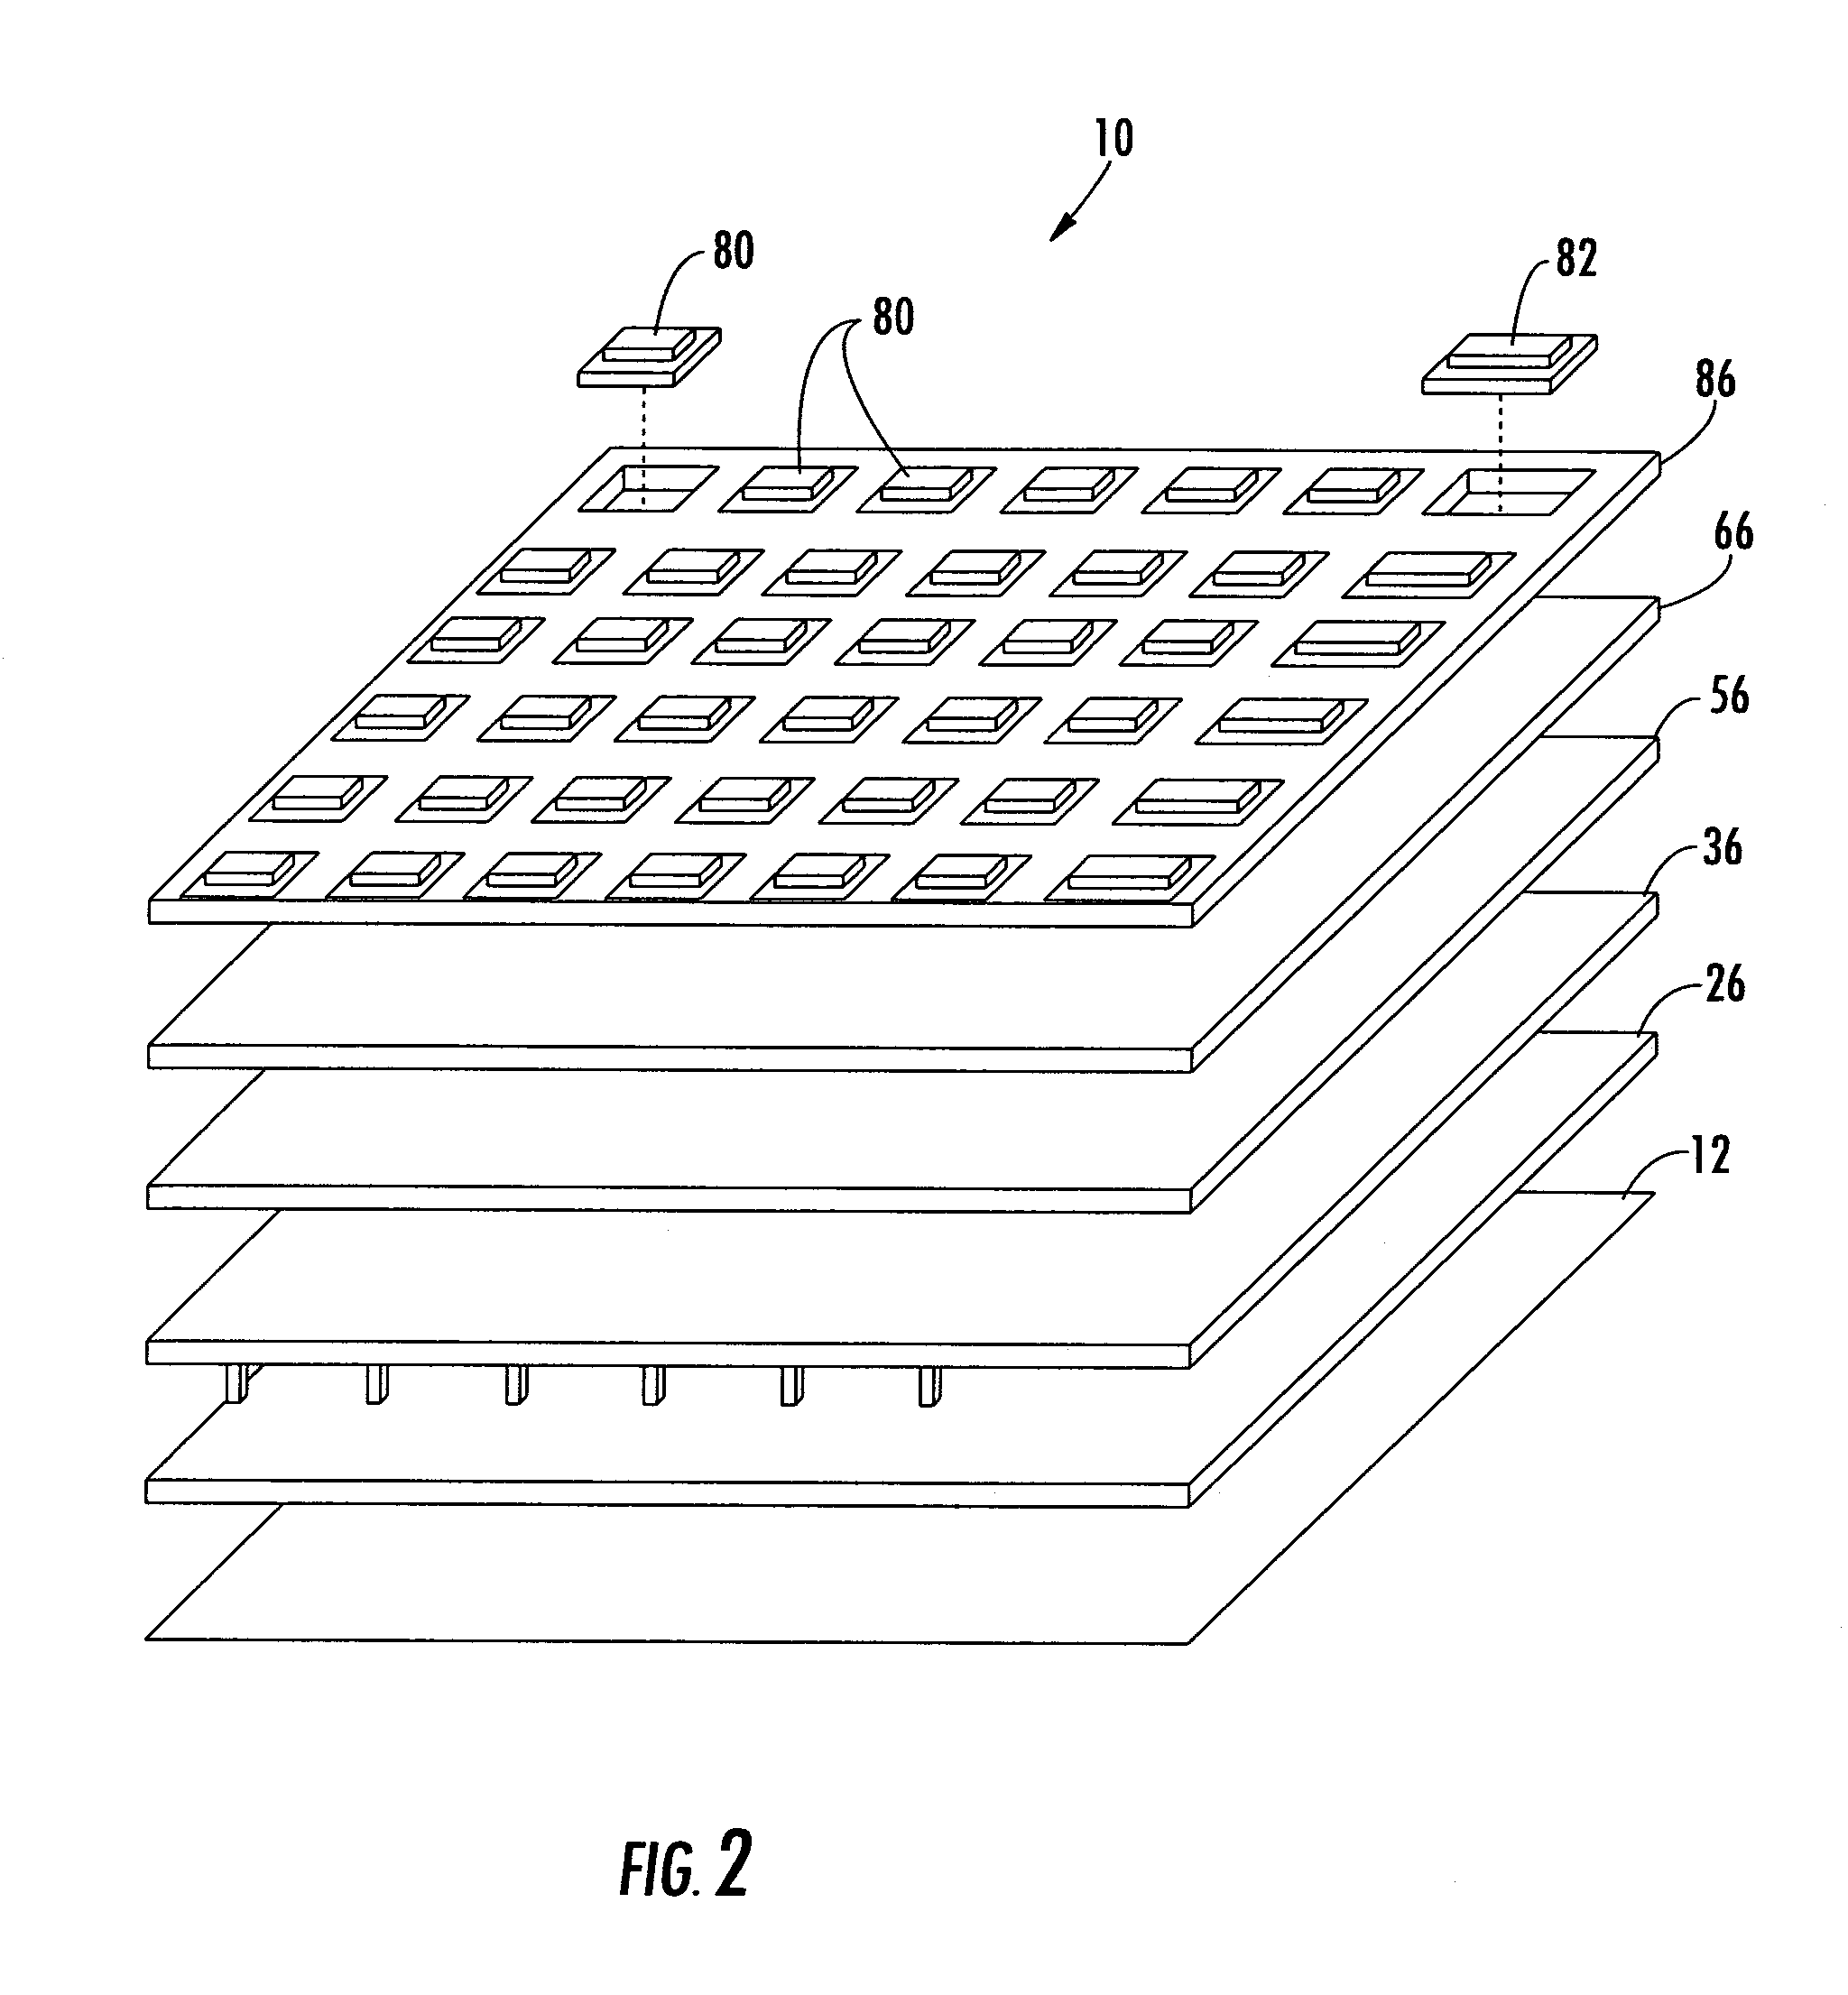 Array antenna including a monolithic antenna feed assembly and related methods